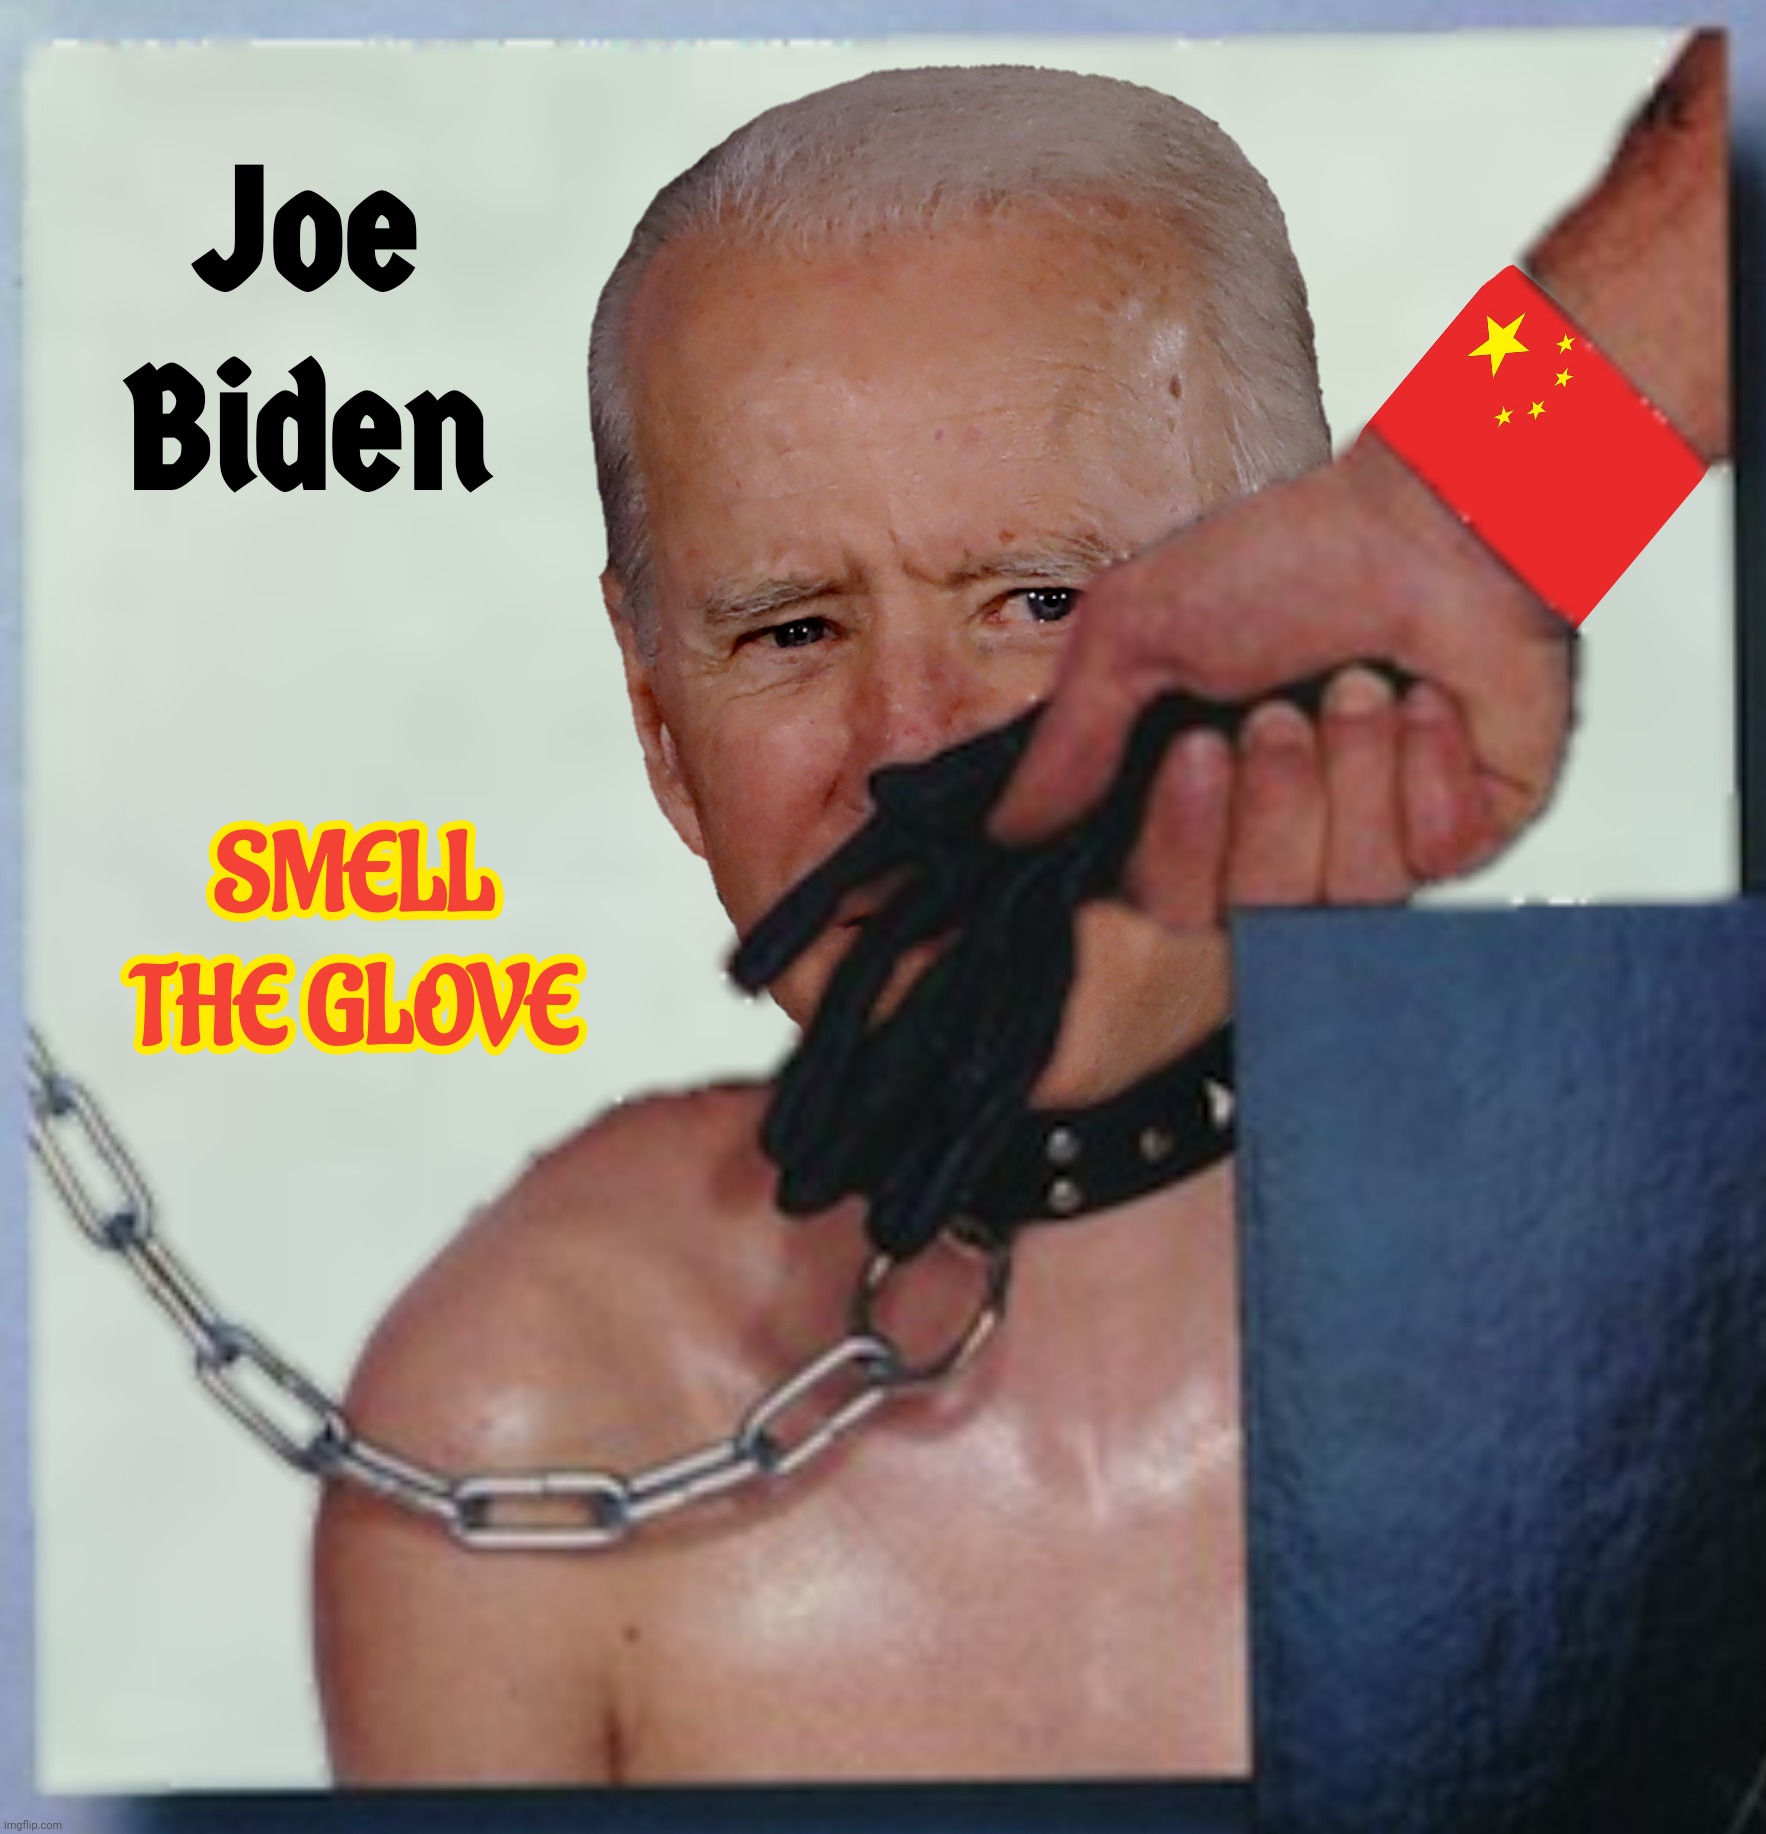 Joe's nose | image tagged in bad photoshop,joe biden,spinal tap,smell the glove,china | made w/ Imgflip meme maker